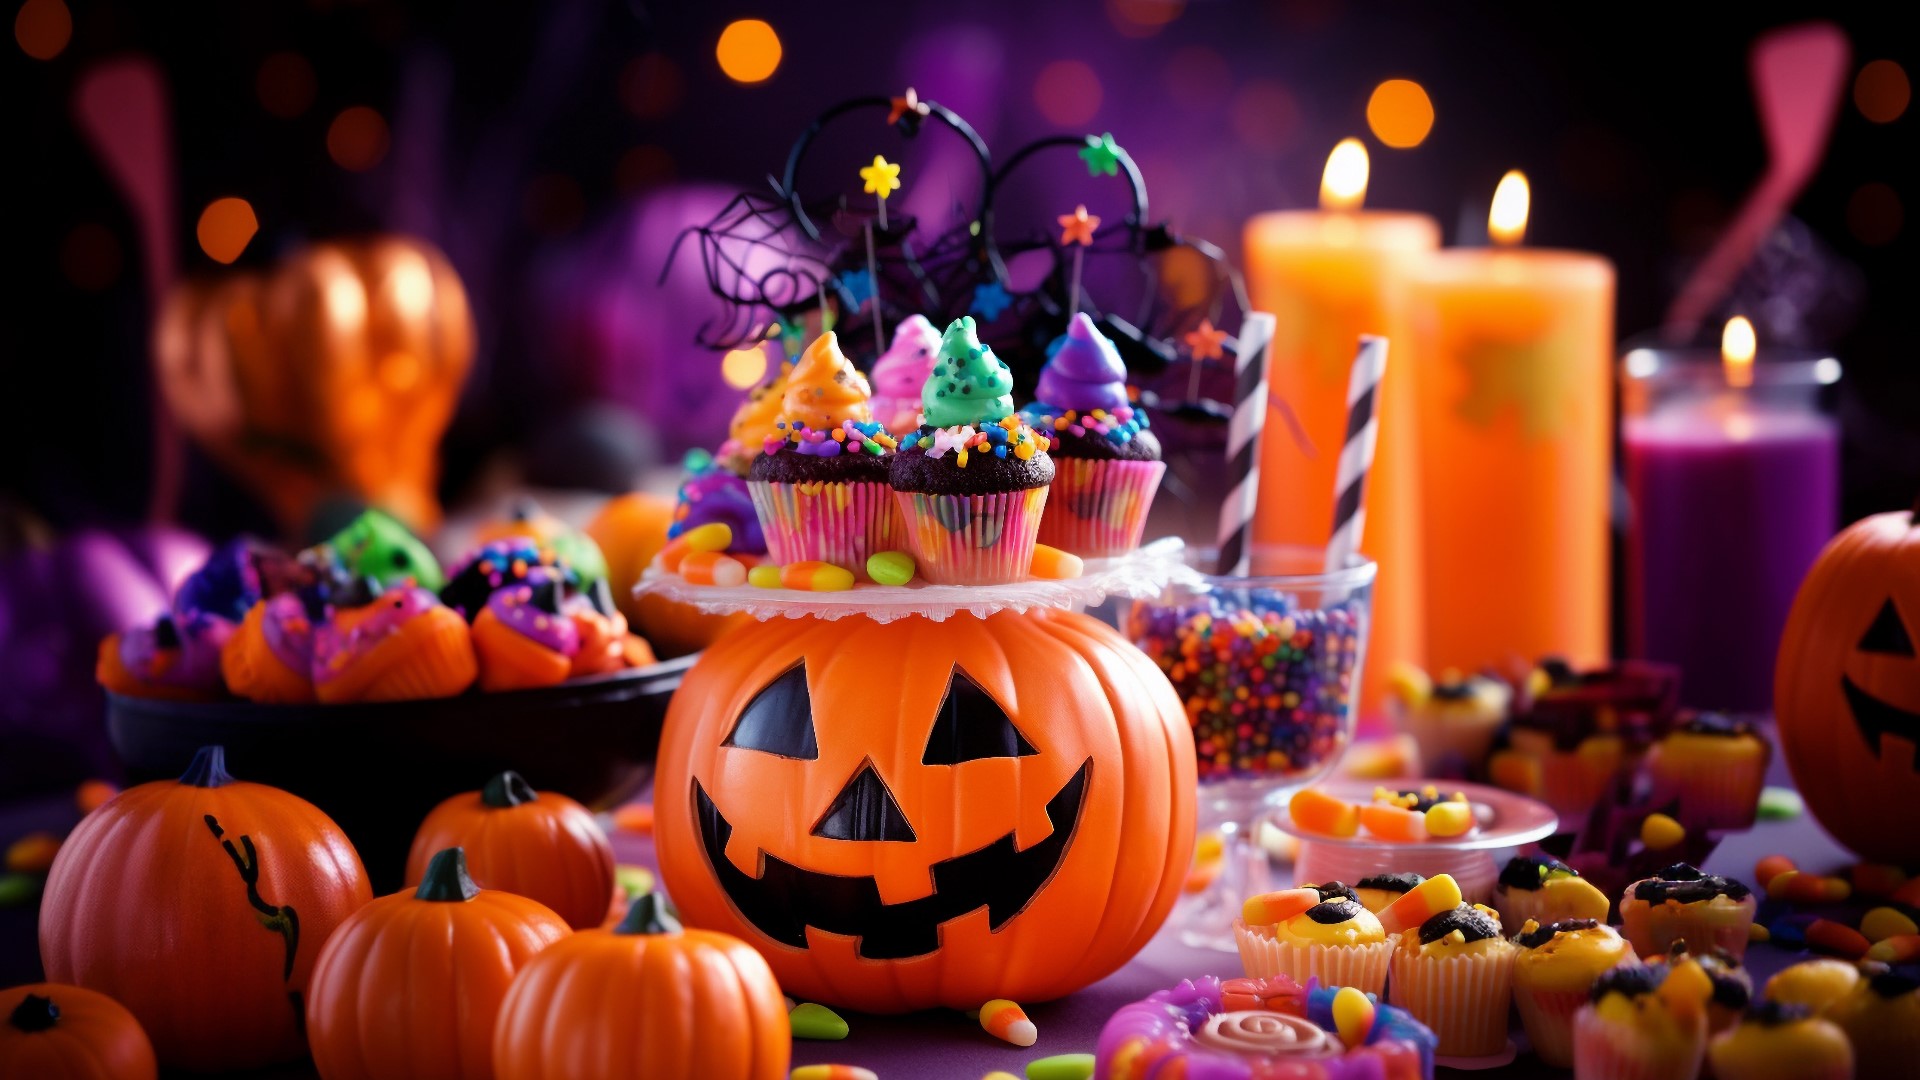 Sponsored by: Limor Media. Lifestyle Contributor Limor Suss shares all her spooky, Halloween essentials.